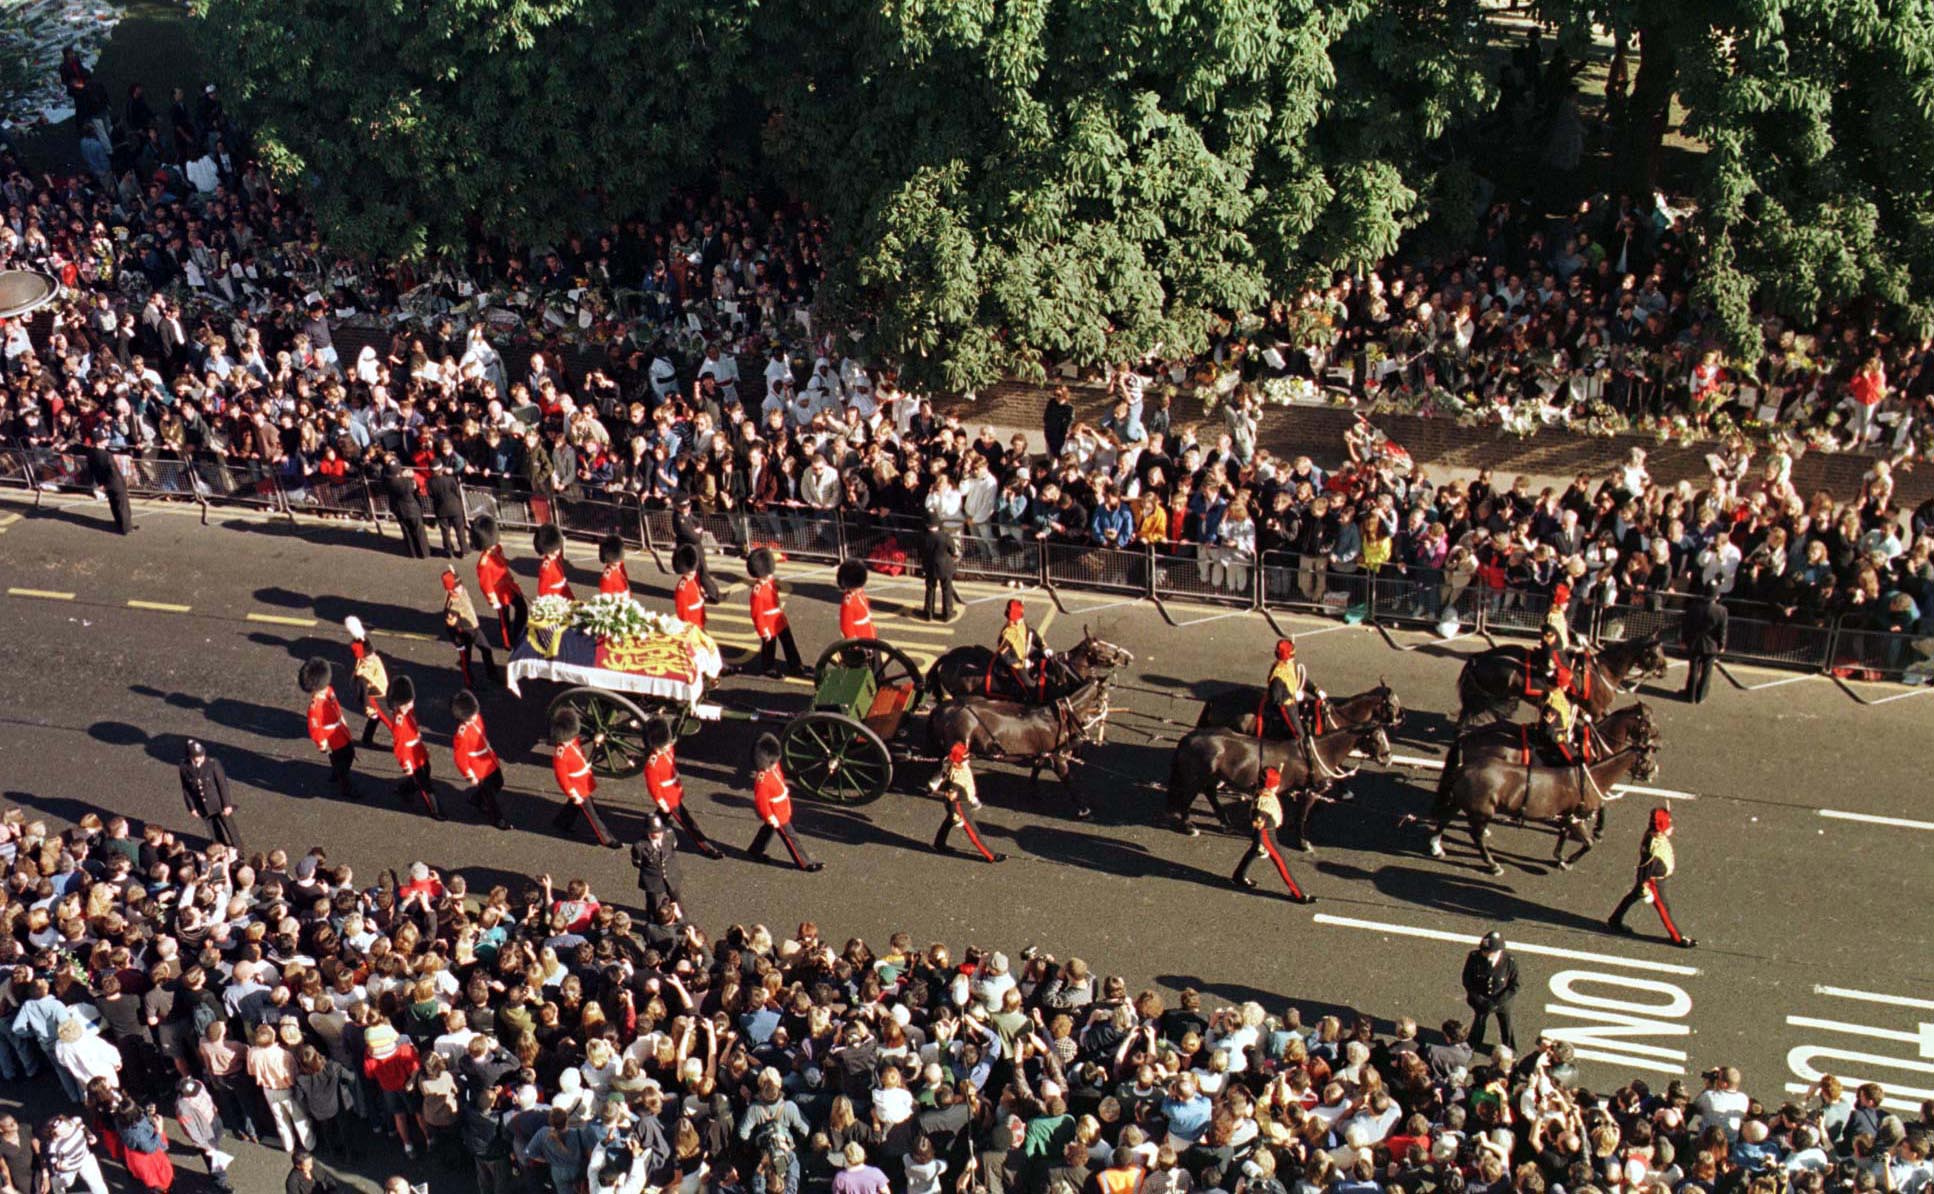 Diana’s funeral procession in front of crowds